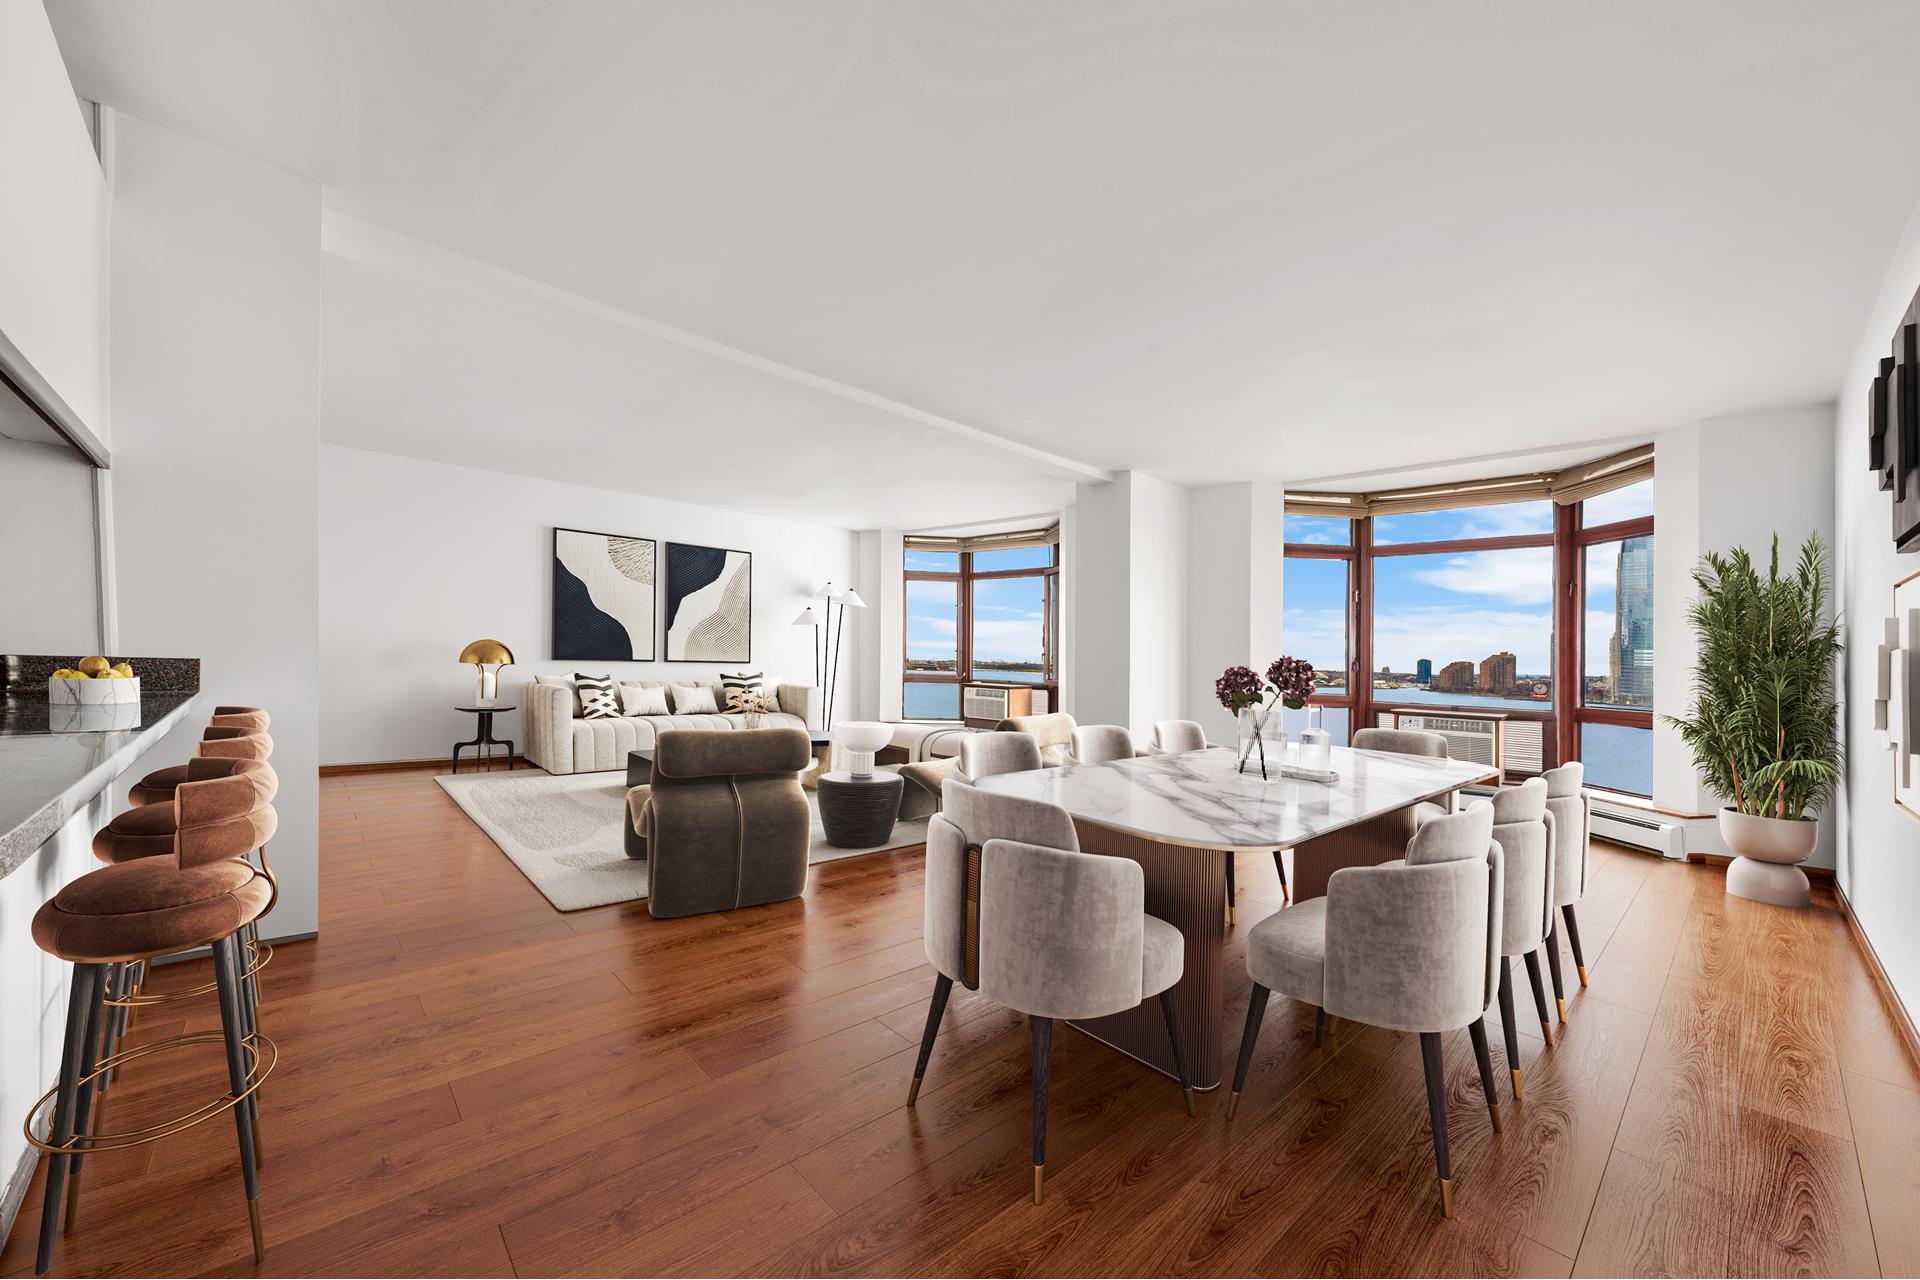 350 Albany Street 10Bc, Battery Park City, Downtown, NYC - 2 Bedrooms  
2 Bathrooms  
6 Rooms - 